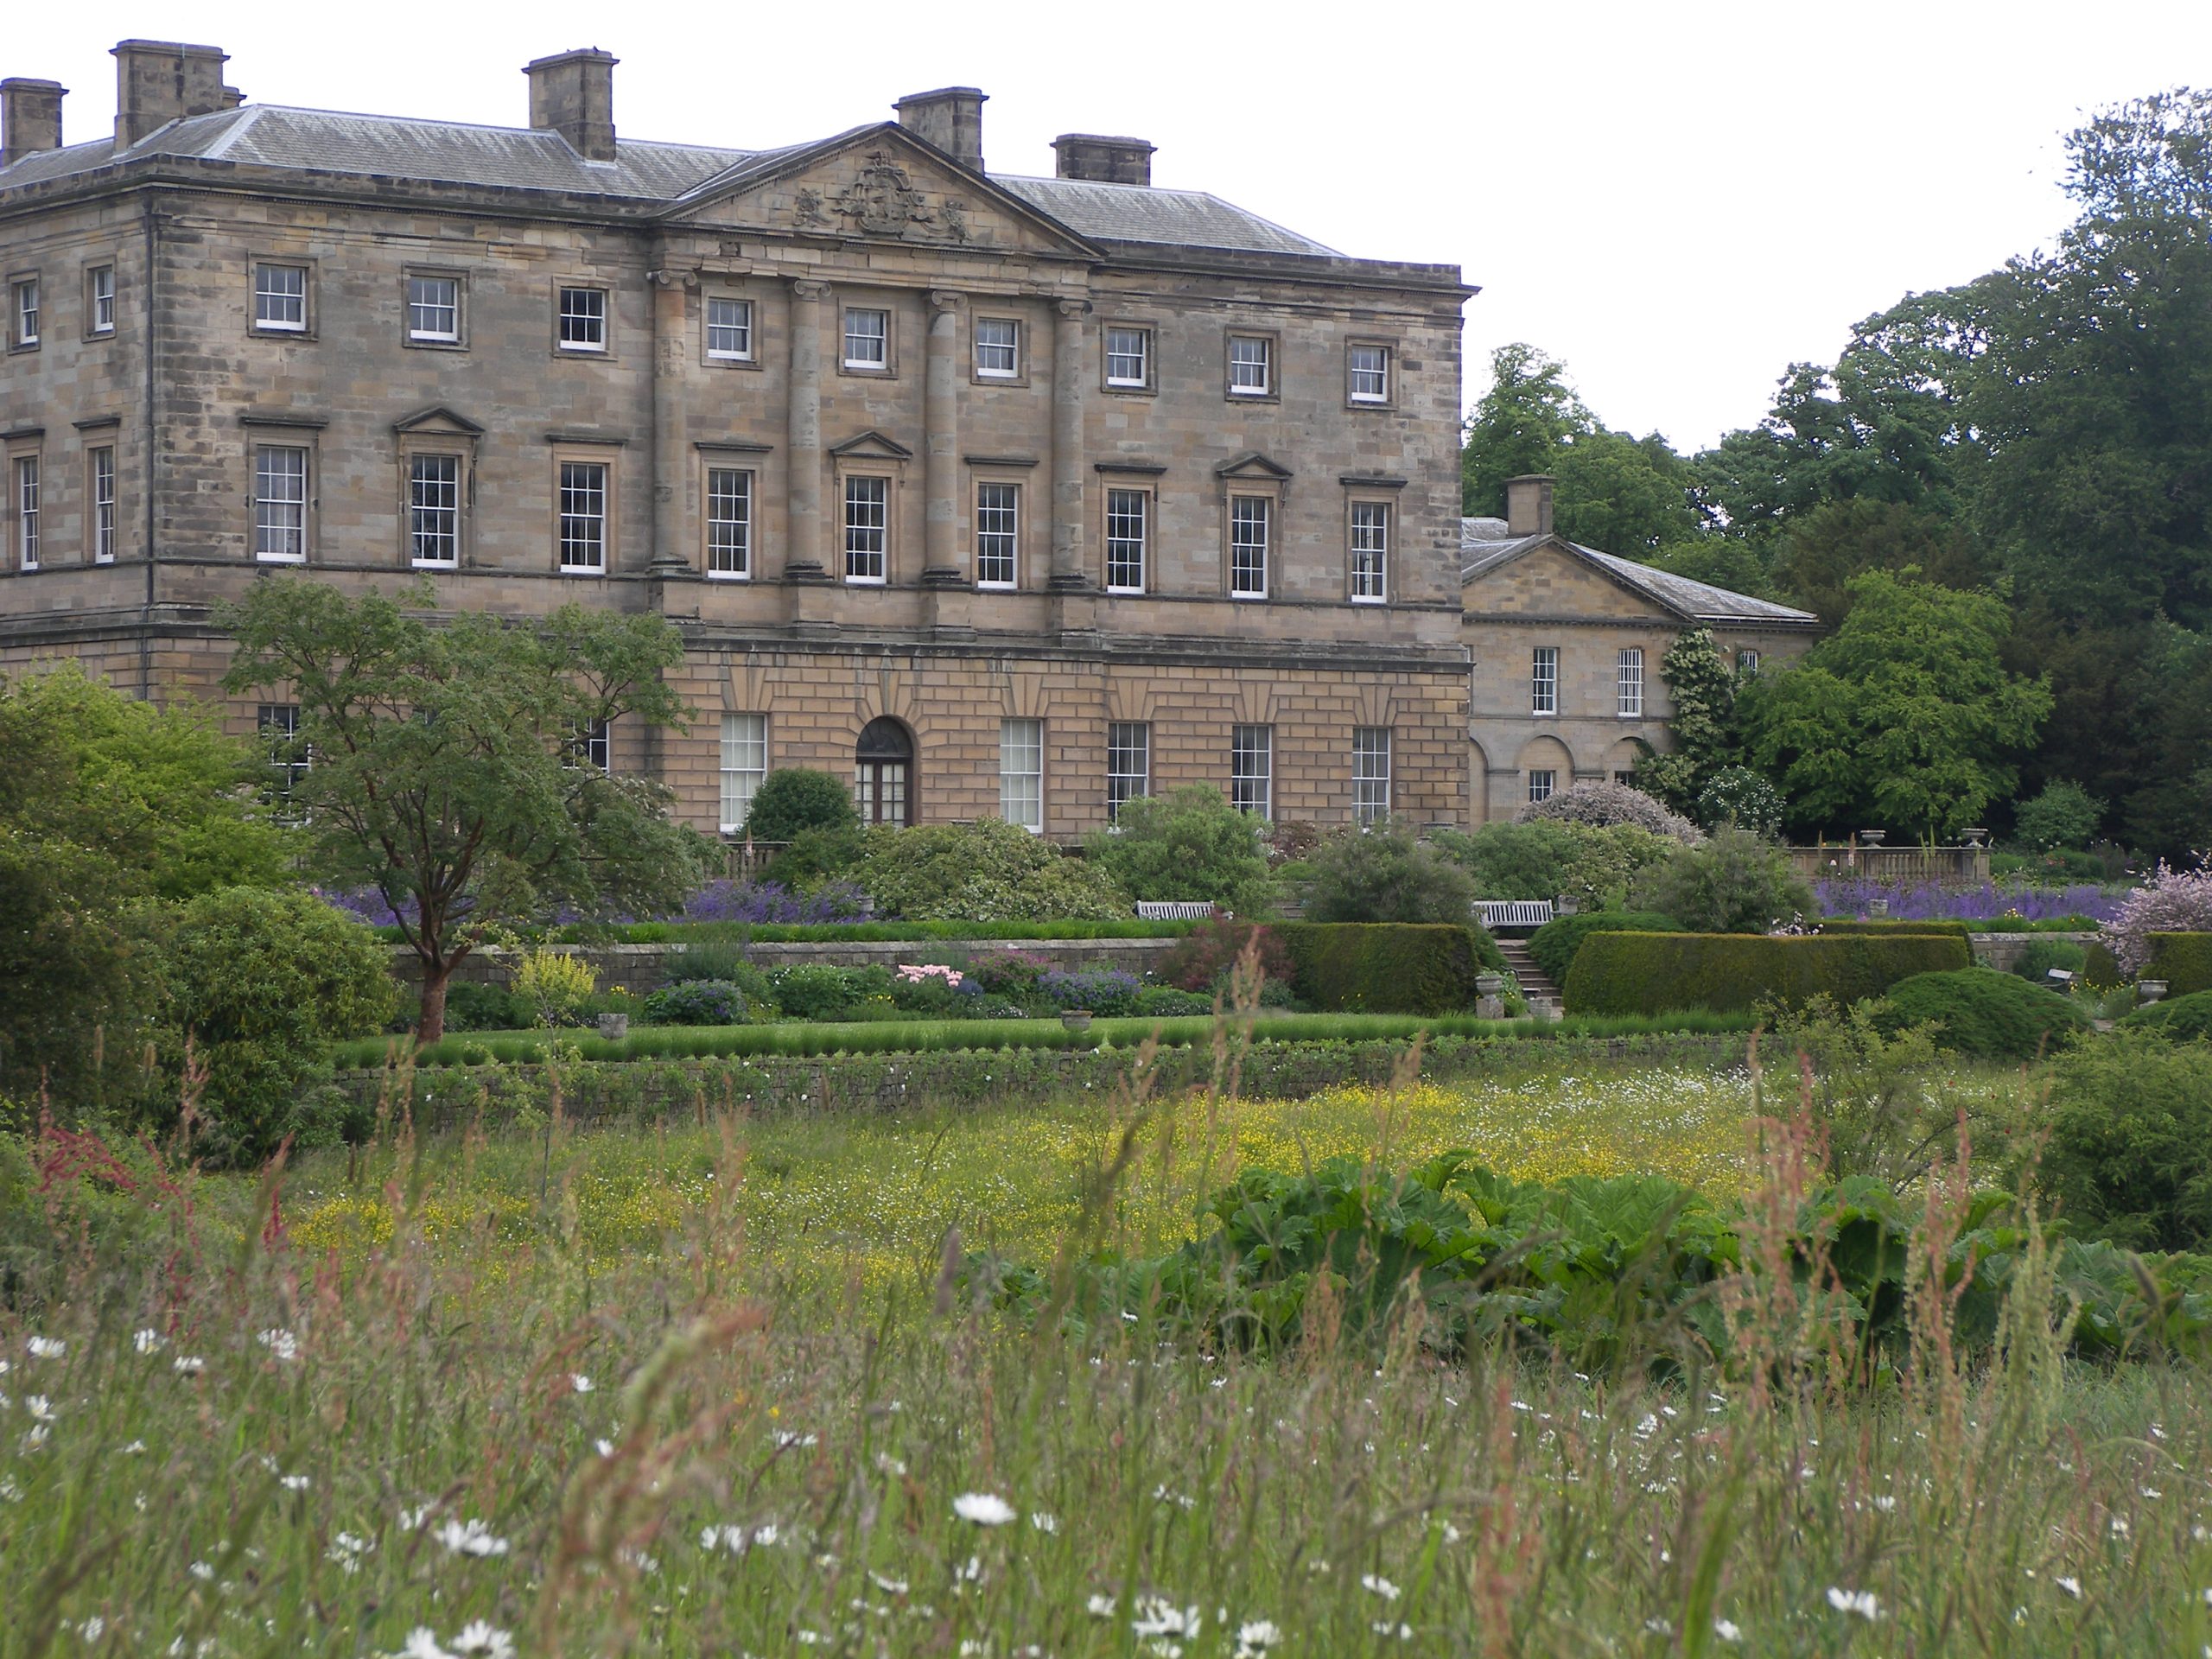 Northumberland - Guided Visit to Howick Hall Gardens & Arboretum